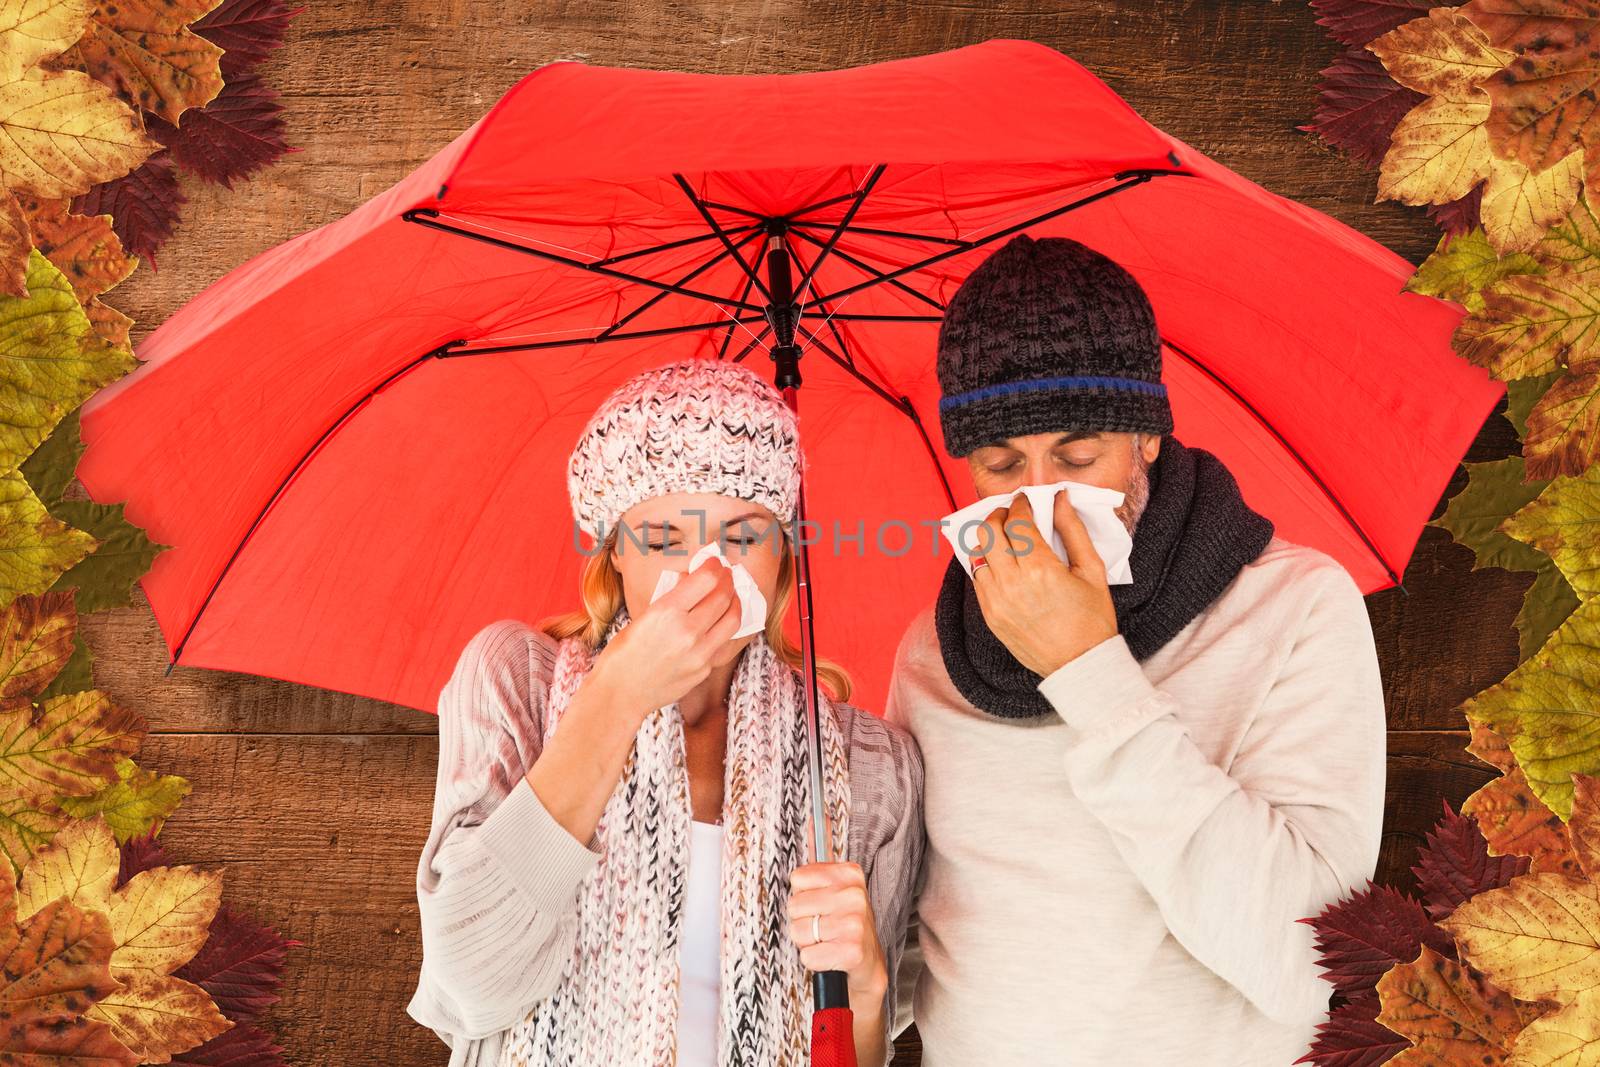 Ill couple sneezing in tissue while standing under umbrella against overhead of wooden planks